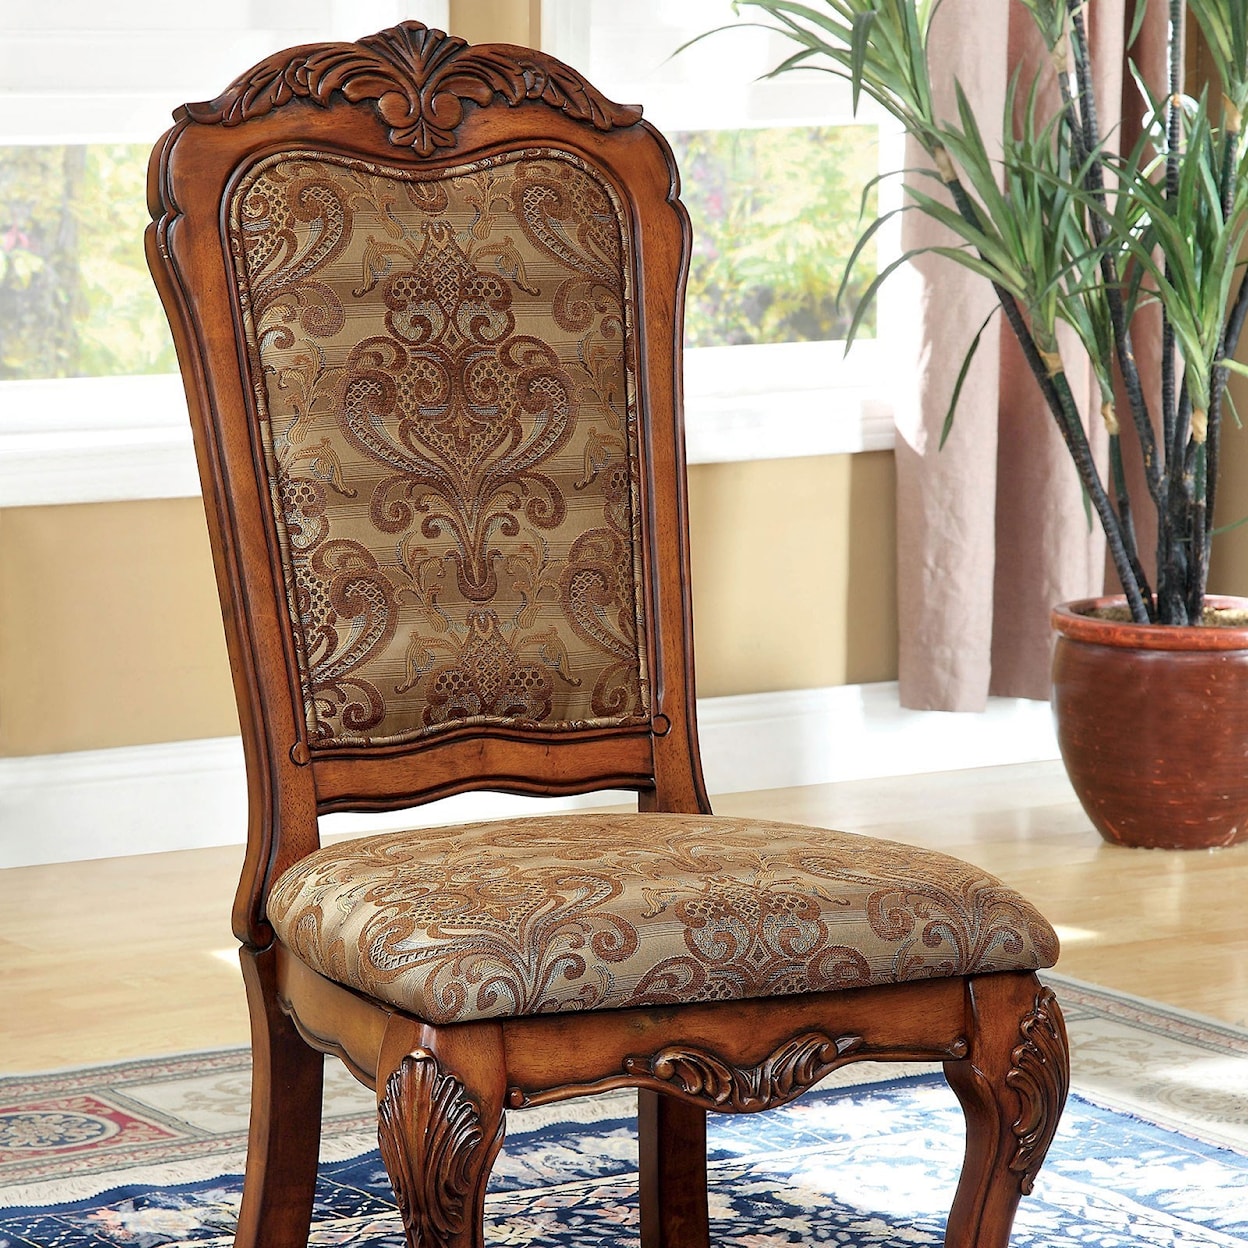 FUSA Medieve Set of Two Dining Chairs